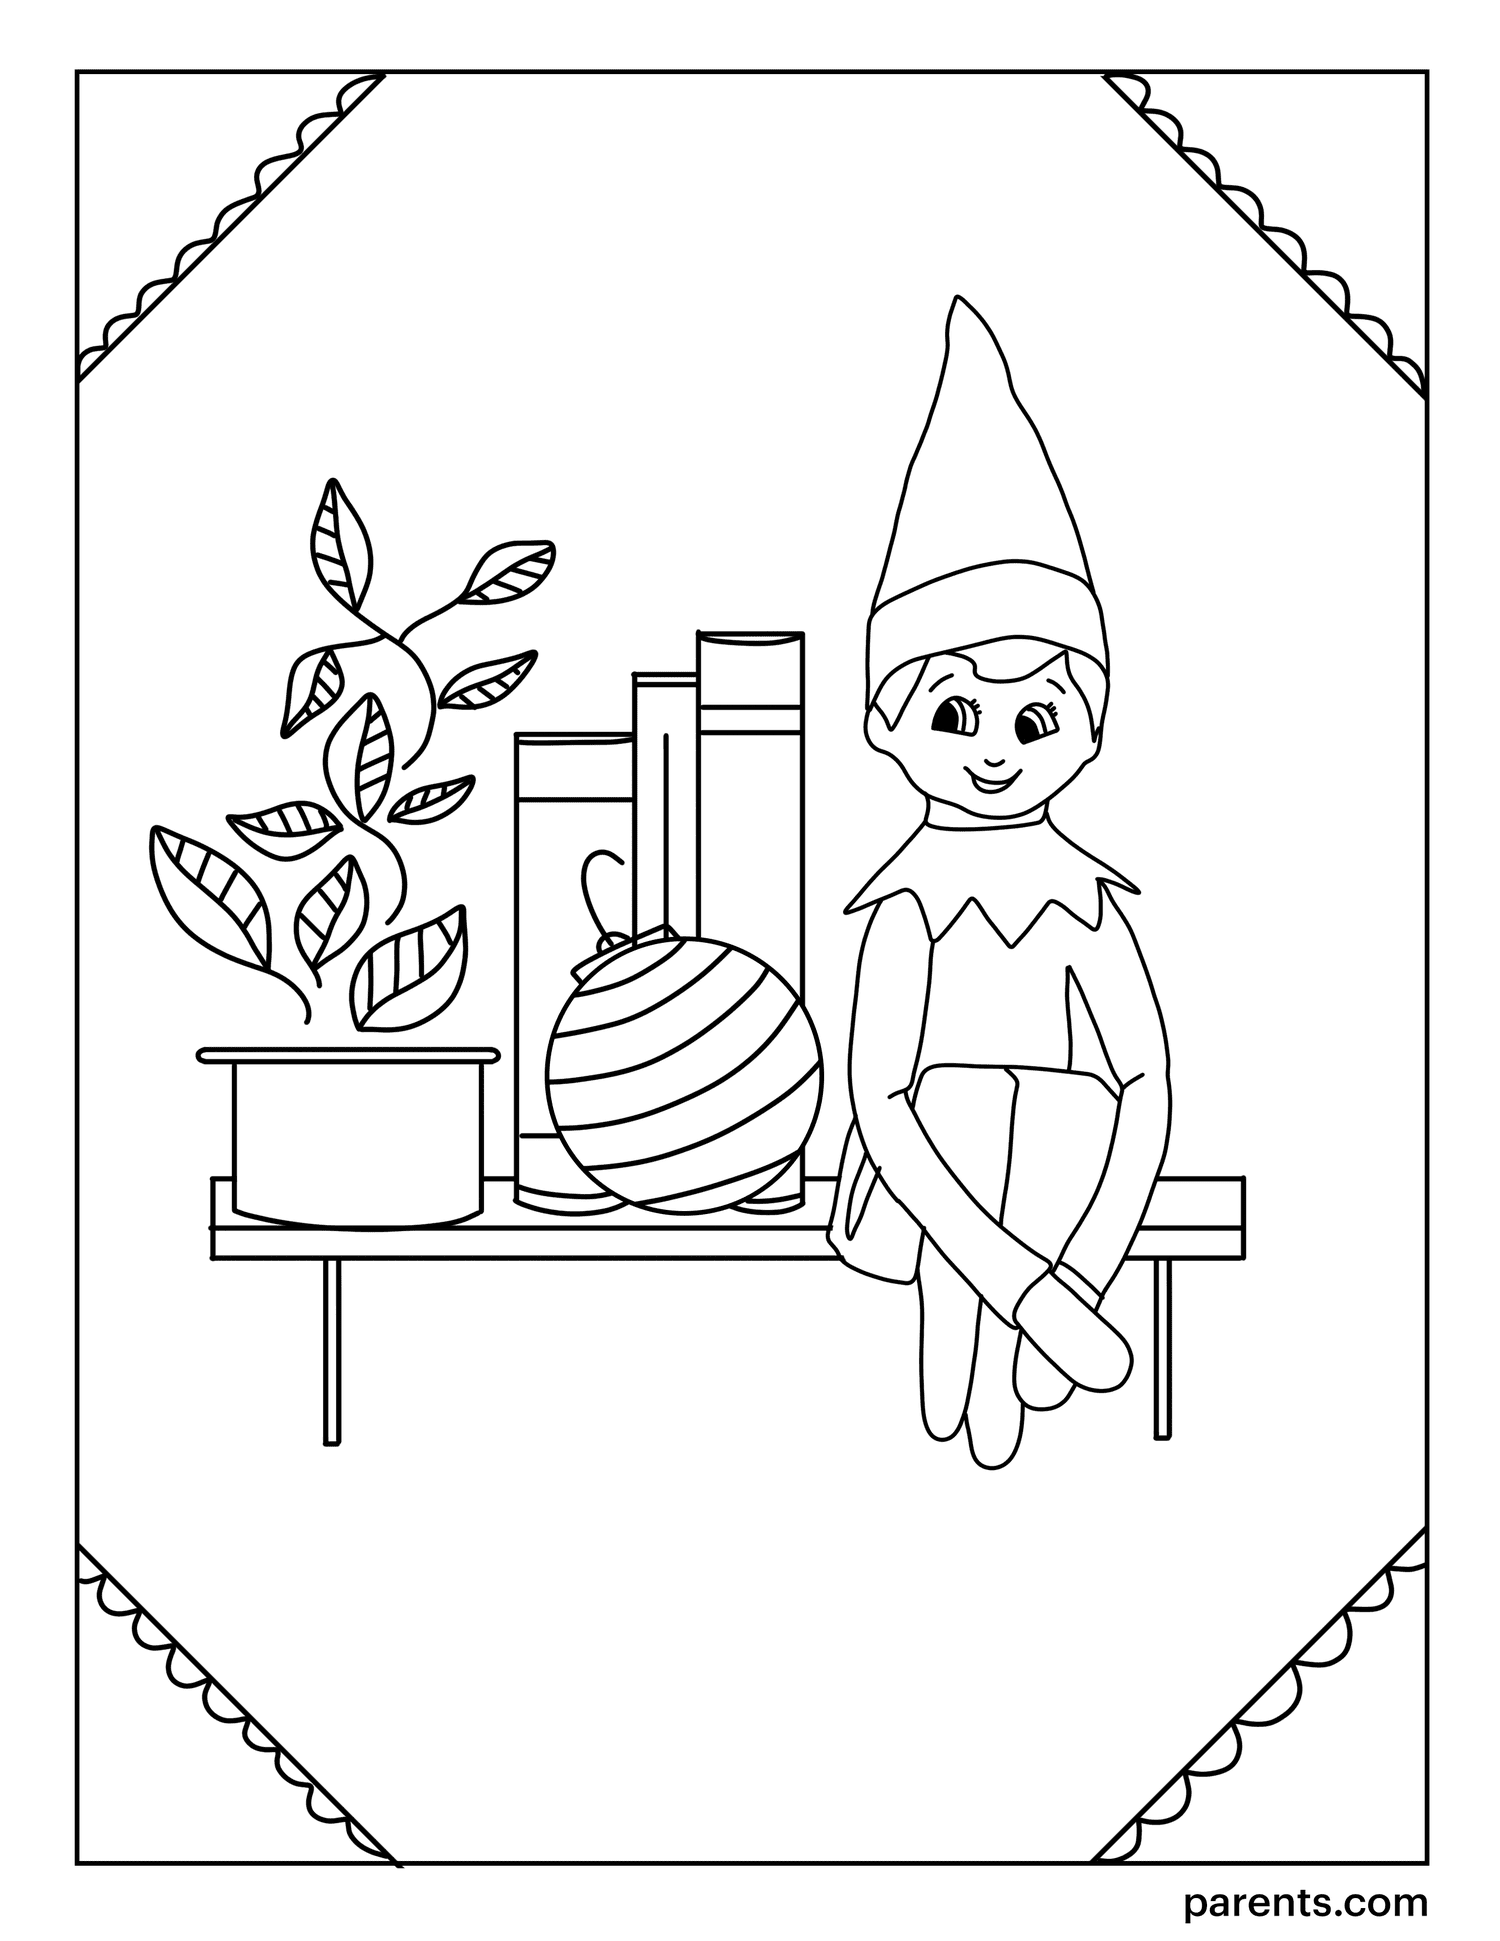 7 Elf On The Shelf Inspired Coloring Pages To Get Kids Excited For Christmas Parents